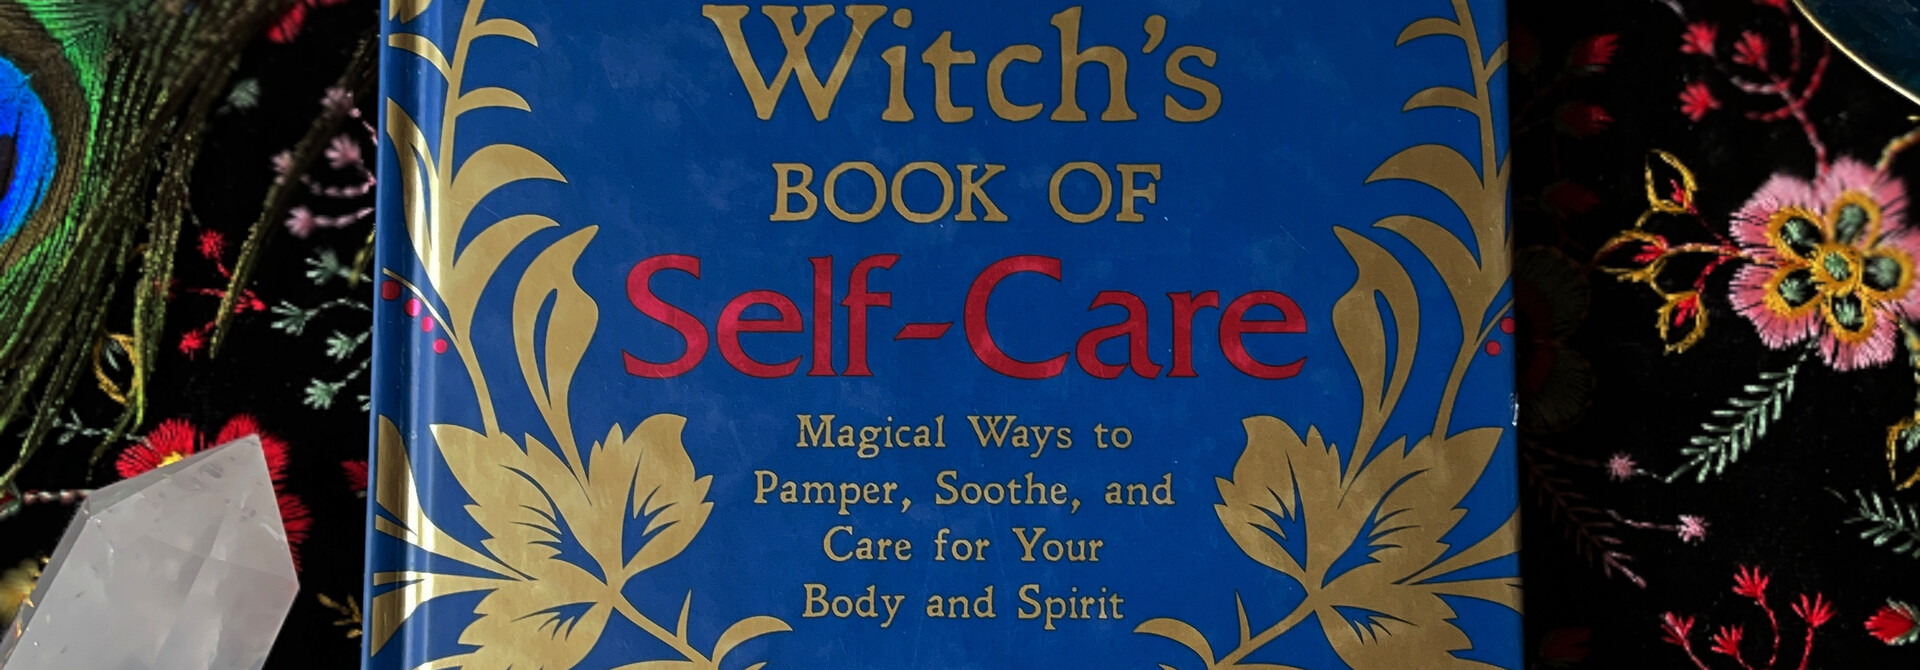 Witch's Book of Self-Care: Magical Ways to Pamper